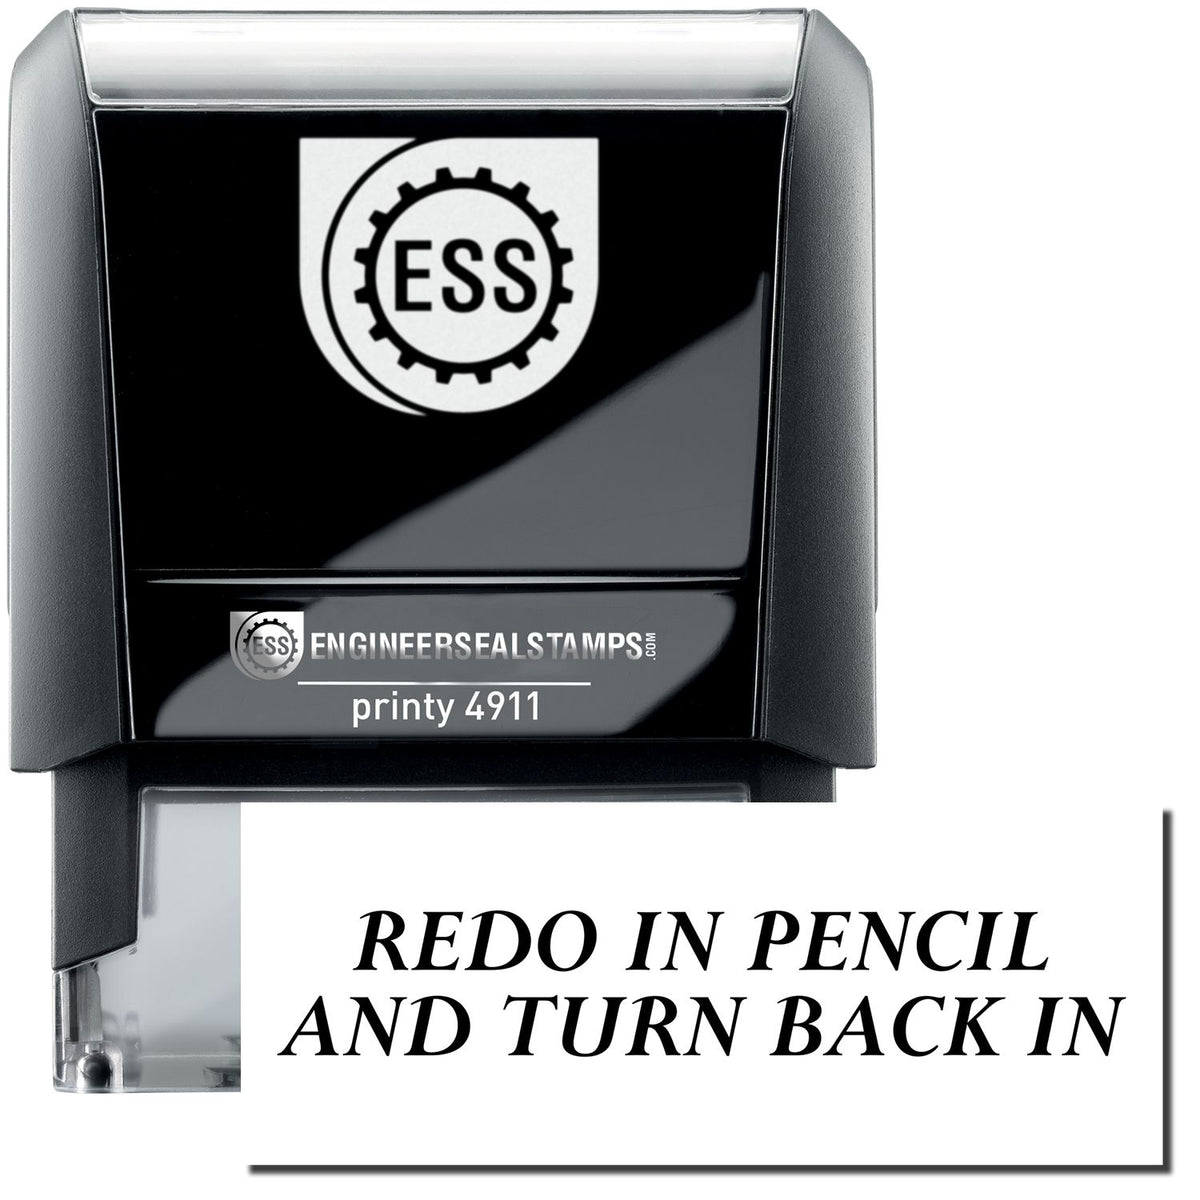 A self-inking stamp with a stamped image showing how the text &quot;REDO IN PENCIL AND TURN BACK IN&quot; is displayed after stamping.